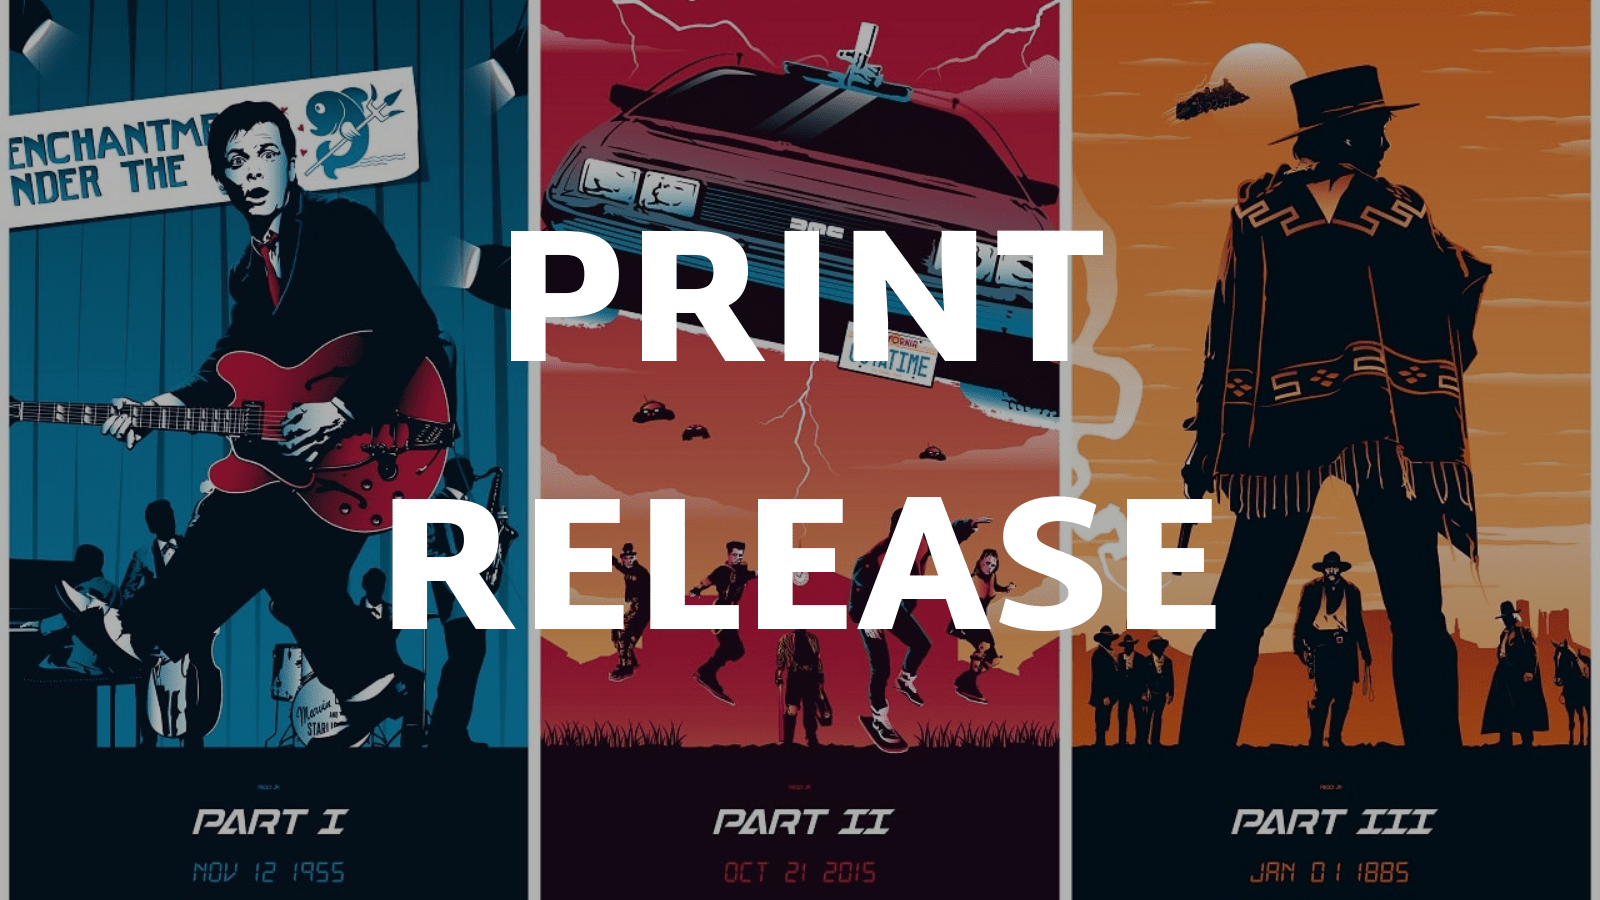 Back to the Future trilogy by Rico Jr